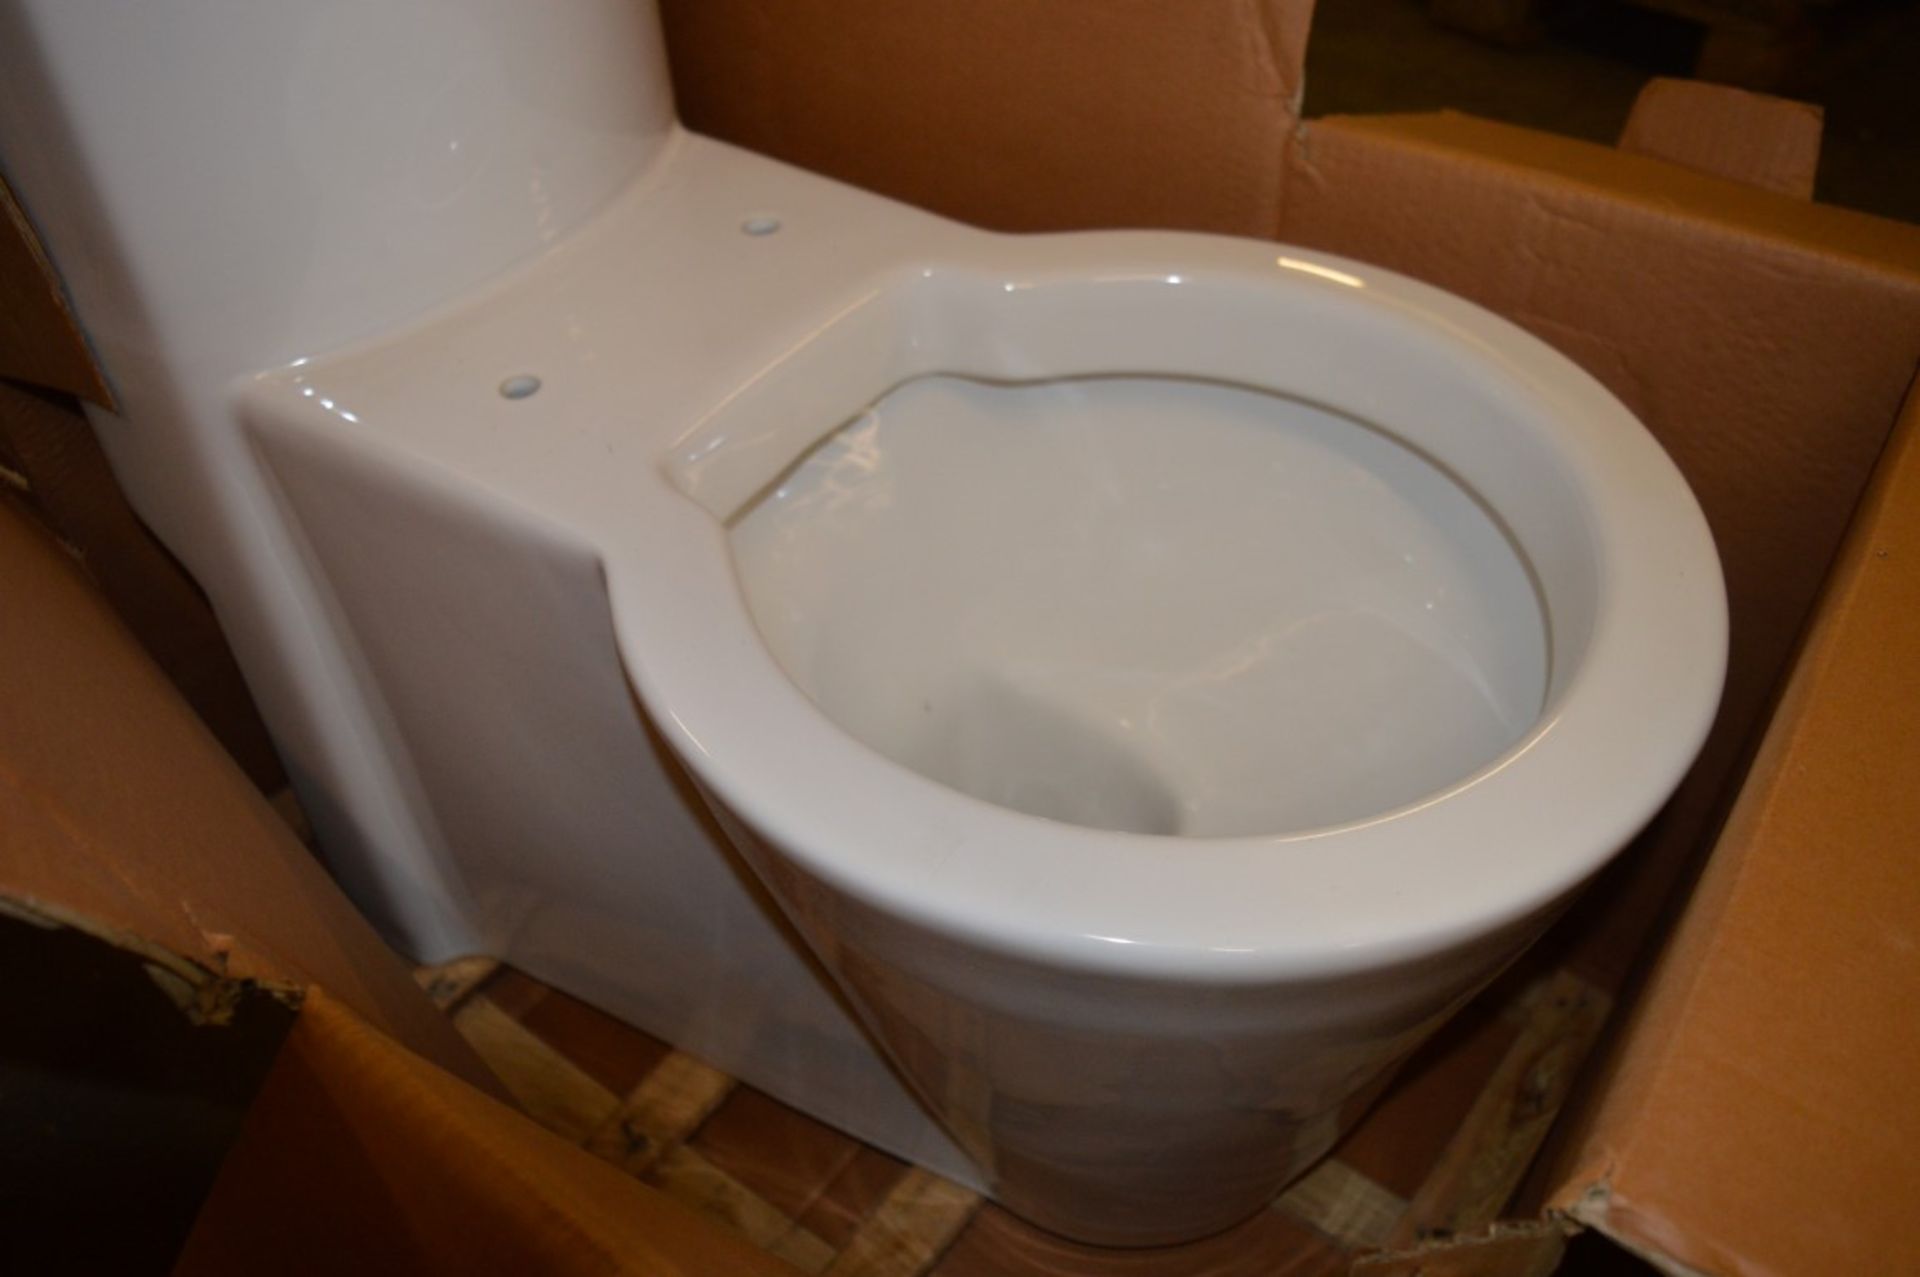 1 x Vogue Bathrooms DECO One Piece Toilet Pan and Cistern - Contemporary White Ceramic Bathroom - Image 4 of 4